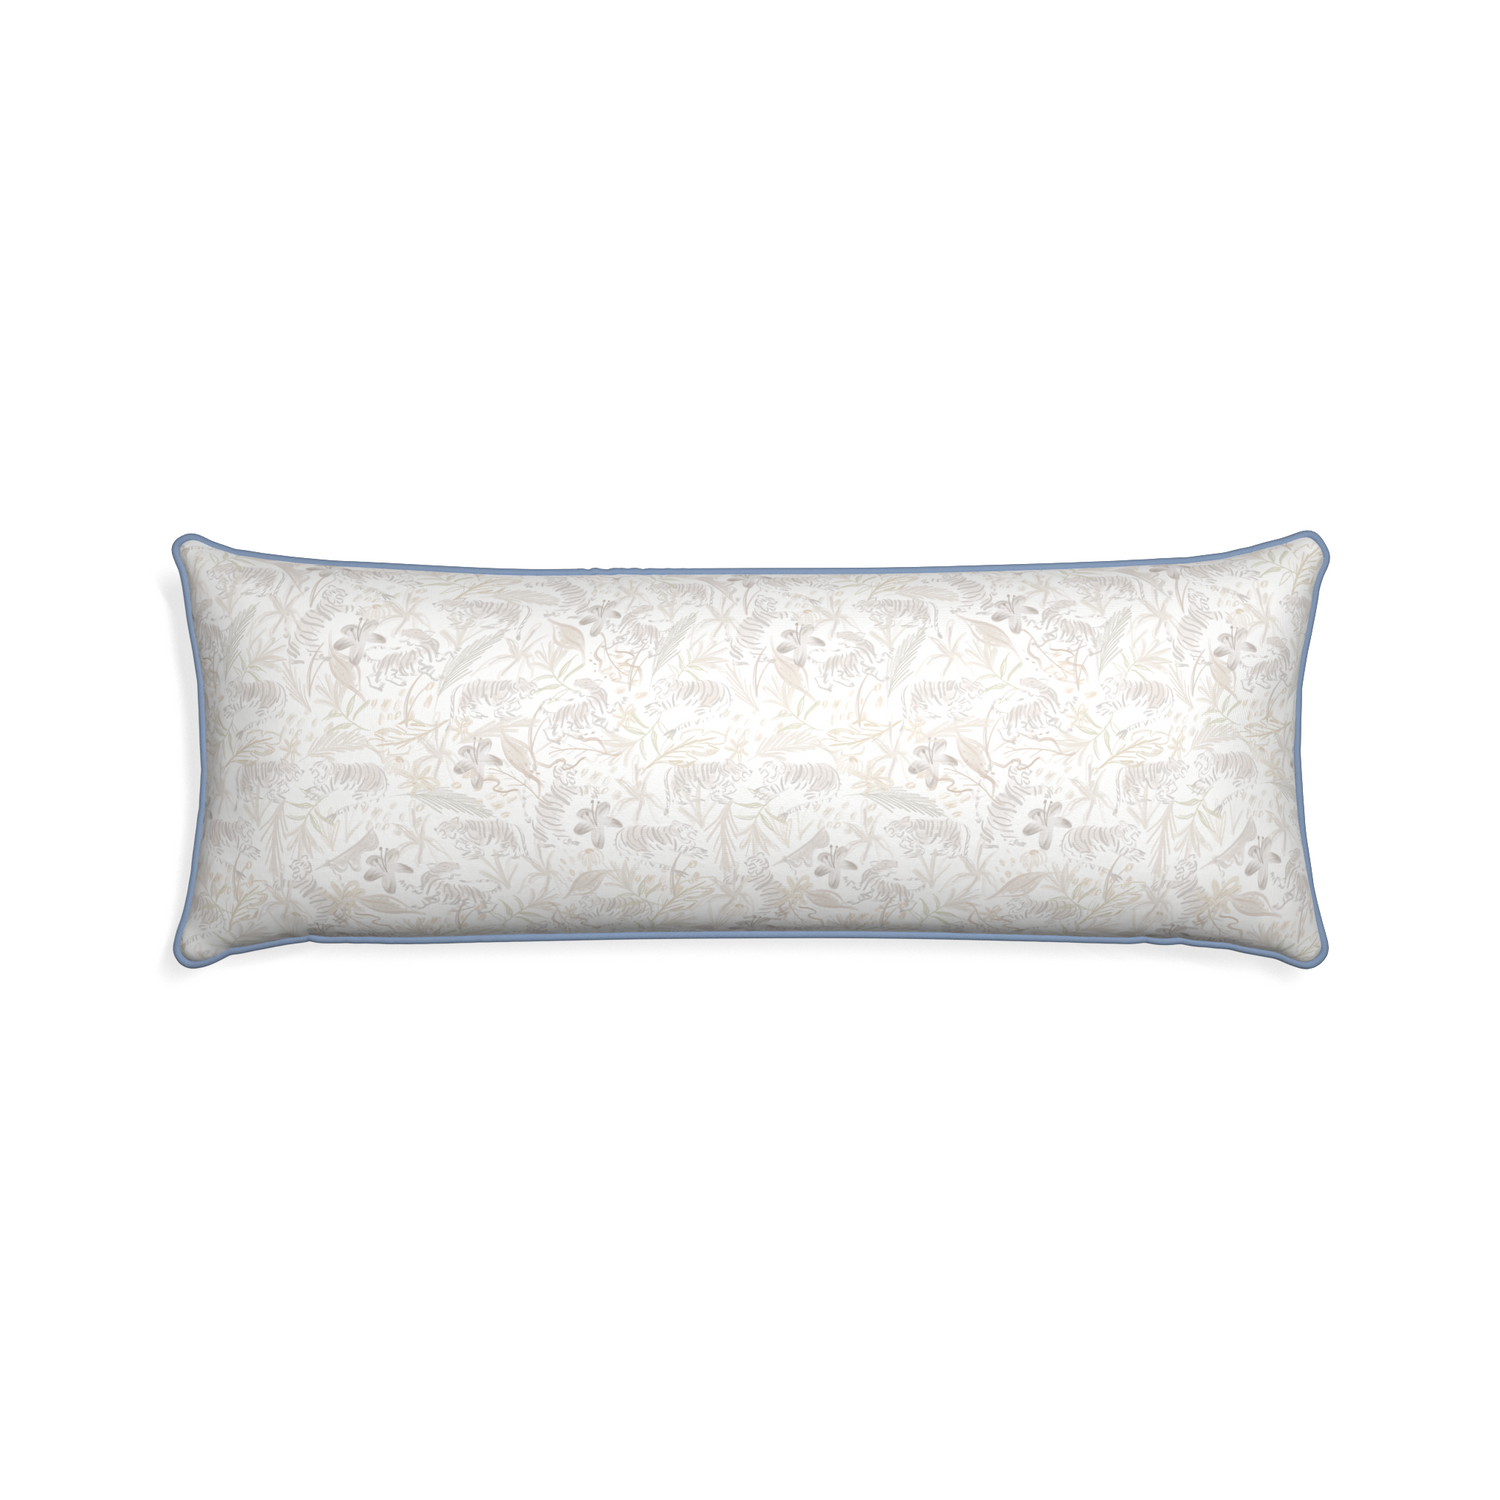 Xl-lumbar frida sand custom beige chinoiserie tigerpillow with sky piping on white background